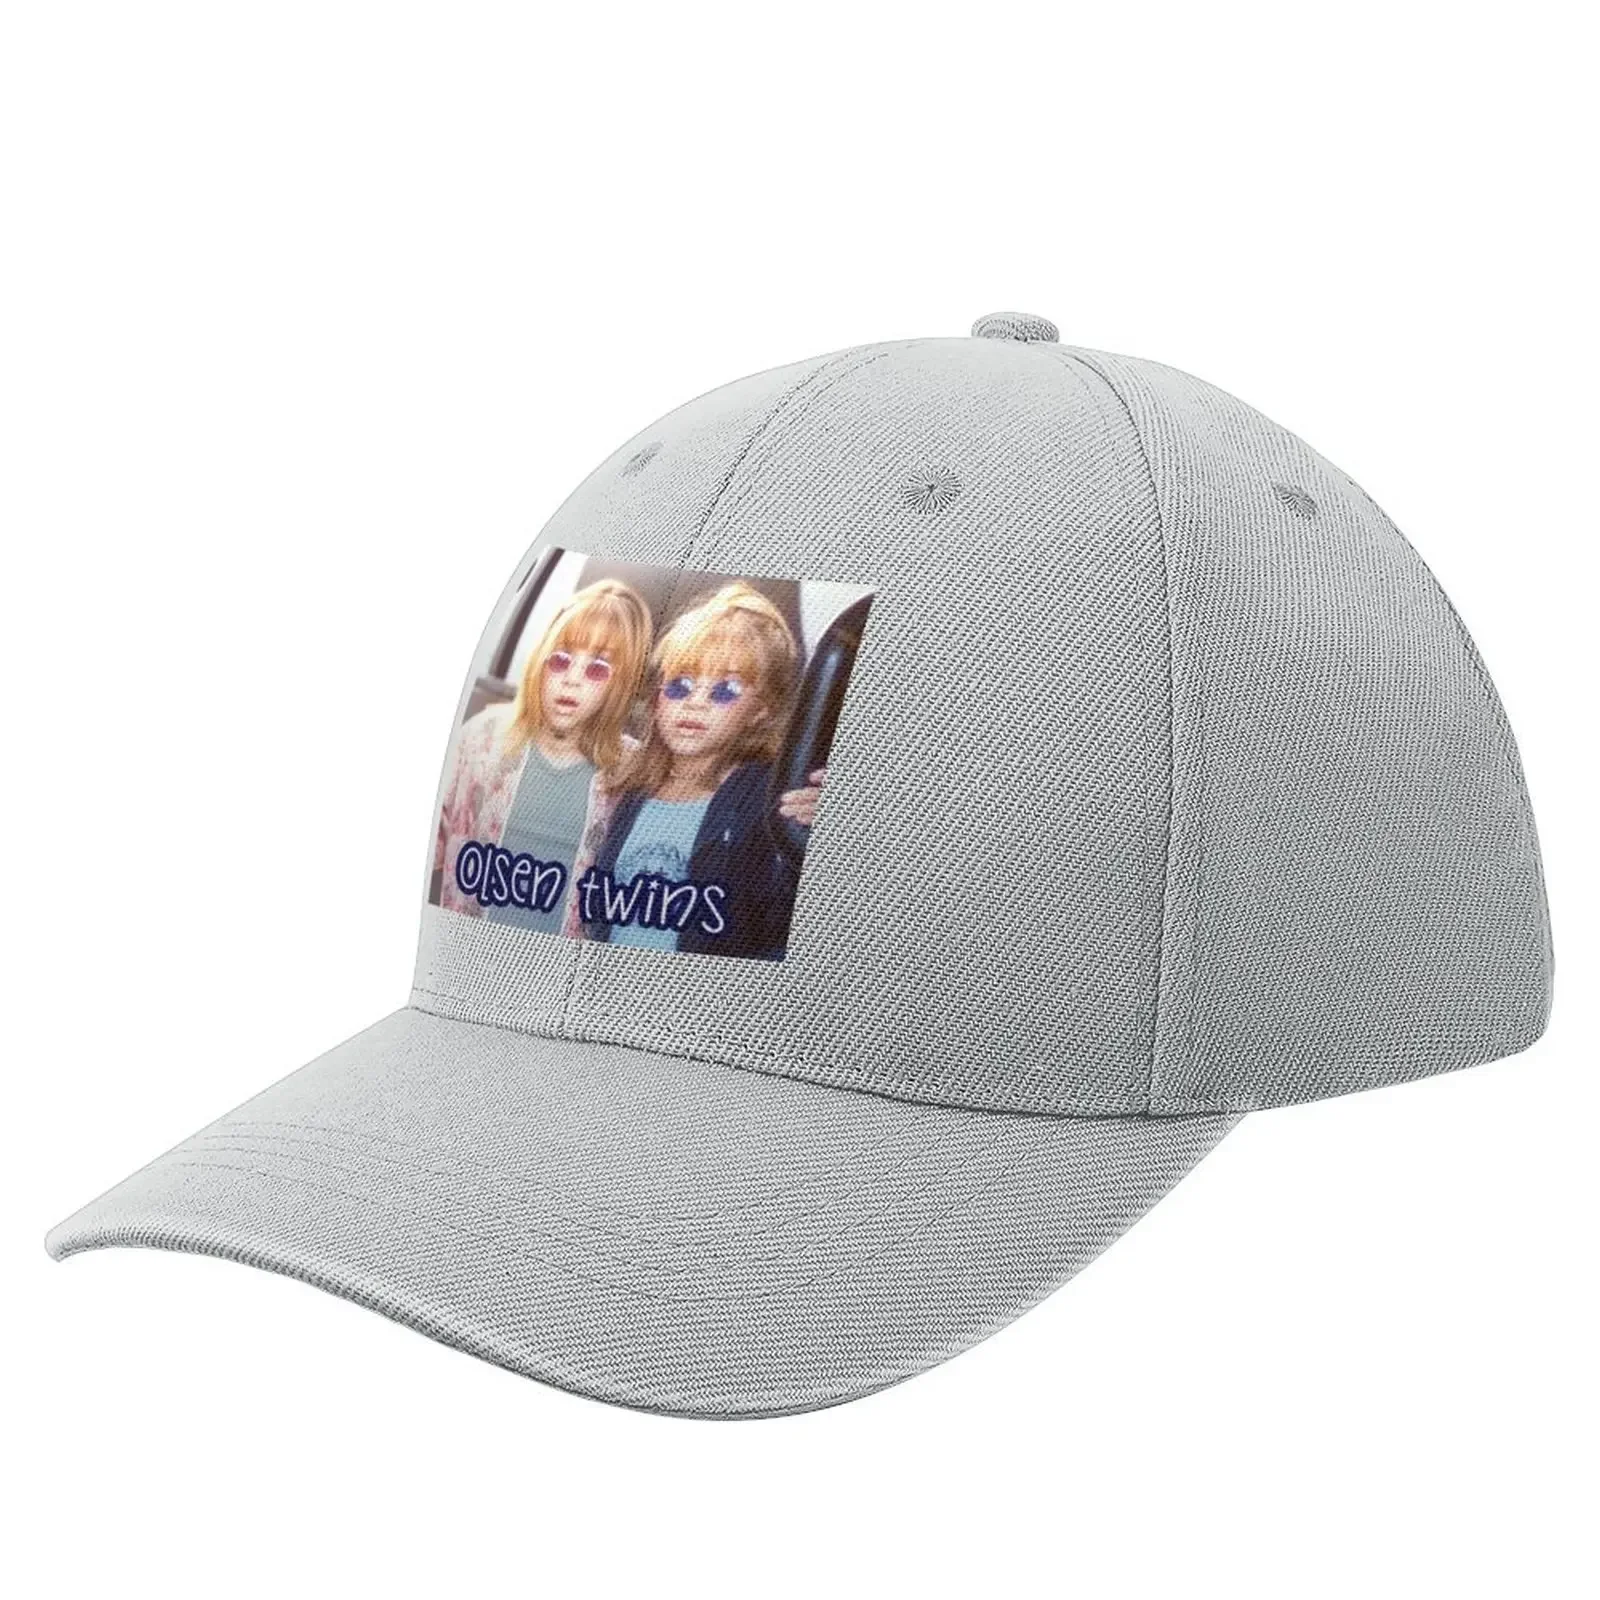 

Olsen Twins Mary Kate and AshleyCap Baseball Cap Hat Man For The Sun Anime Hats For Women Men'S